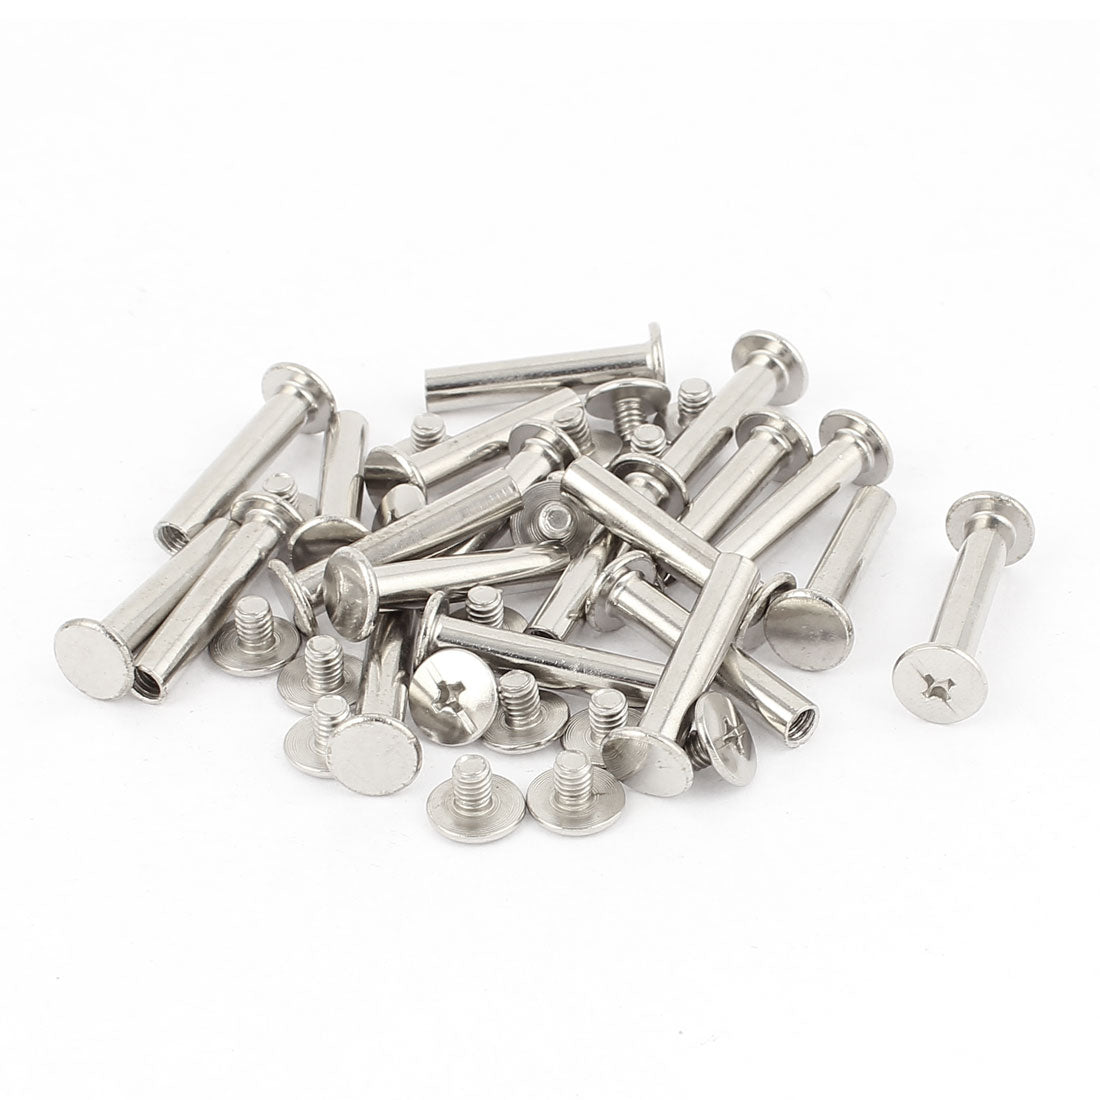 uxcell Uxcell 20Pcs M5x25mm Nickel Plated Binding Screw Post for Scrapbook Photo Albums